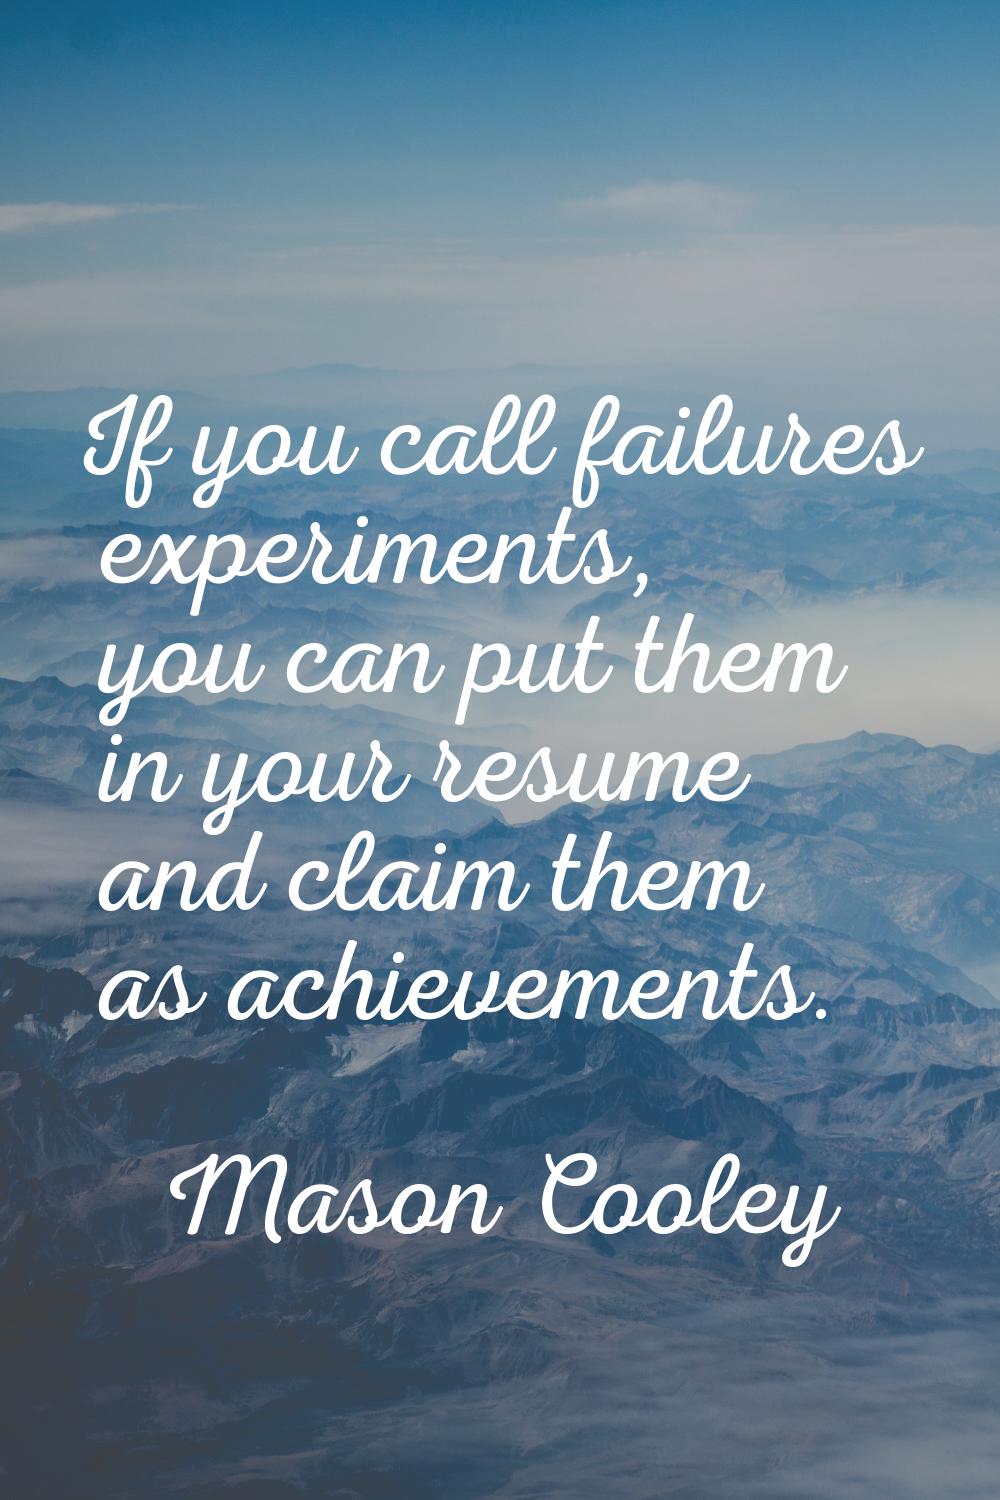 If you call failures experiments, you can put them in your resume and claim them as achievements.